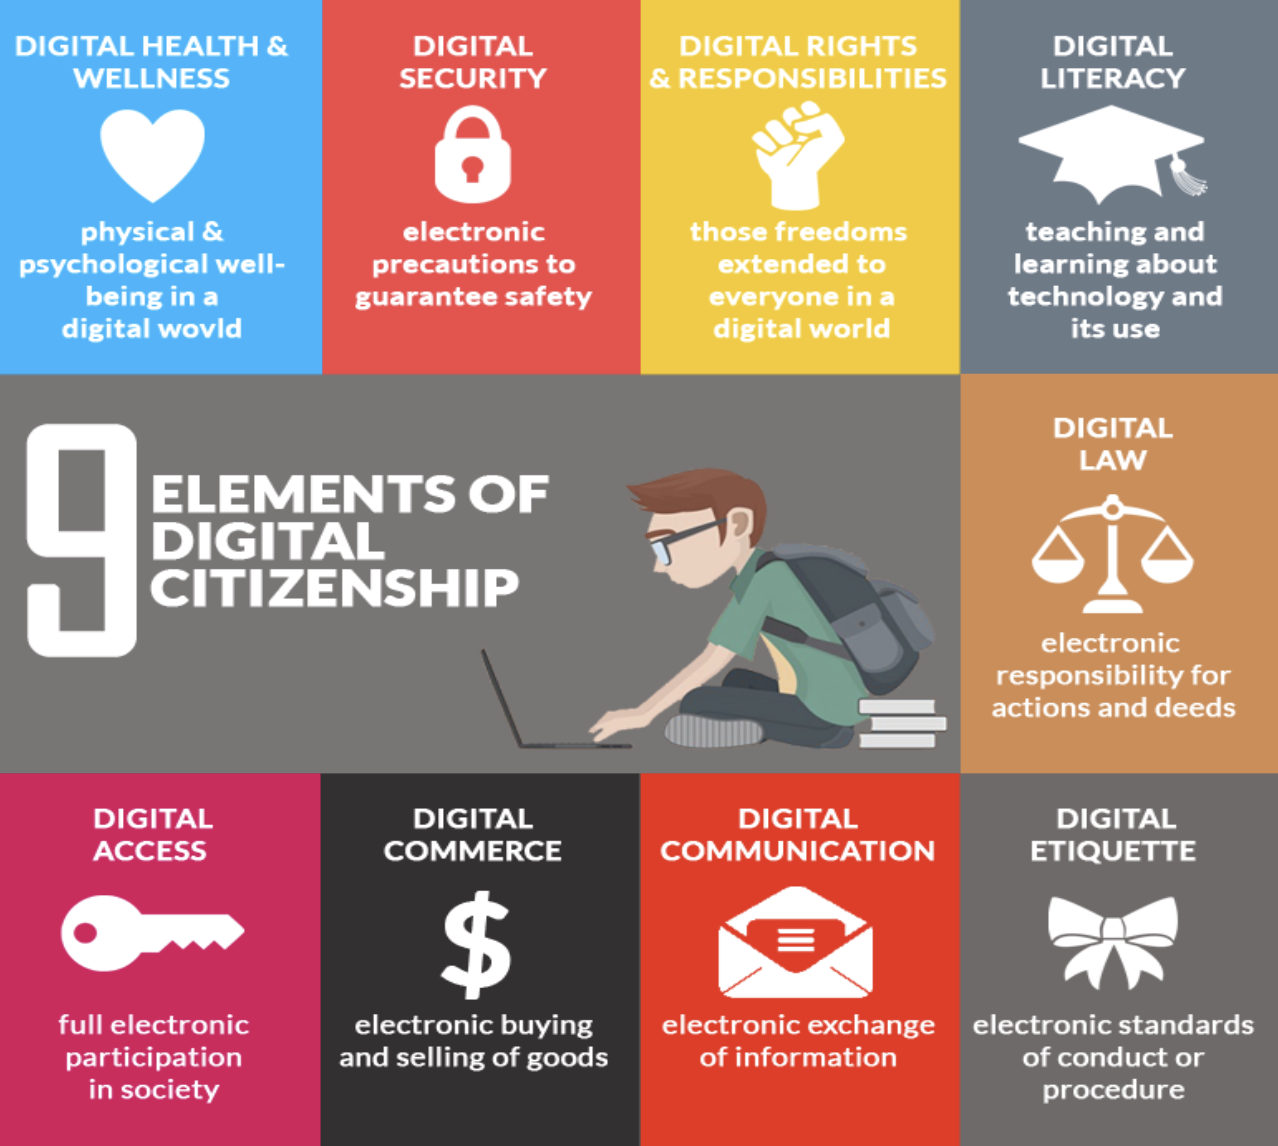 Digital Learning Lab: Digital Guidelines for Physical Education